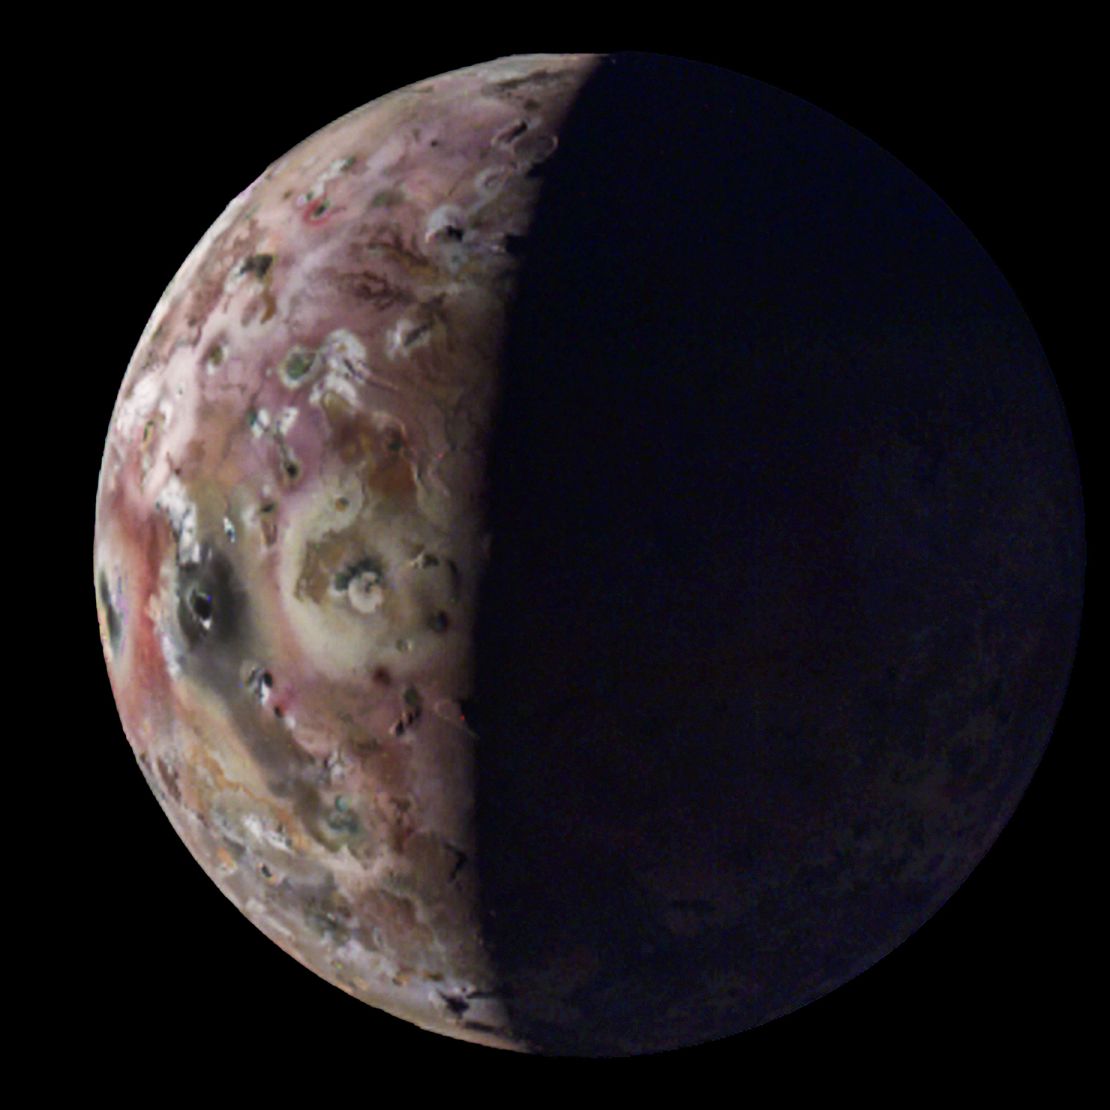 The JunoCam instrument captured the first-ever image of Io's south polar region during Juno's 60th flyby of Jupiter on April 9.